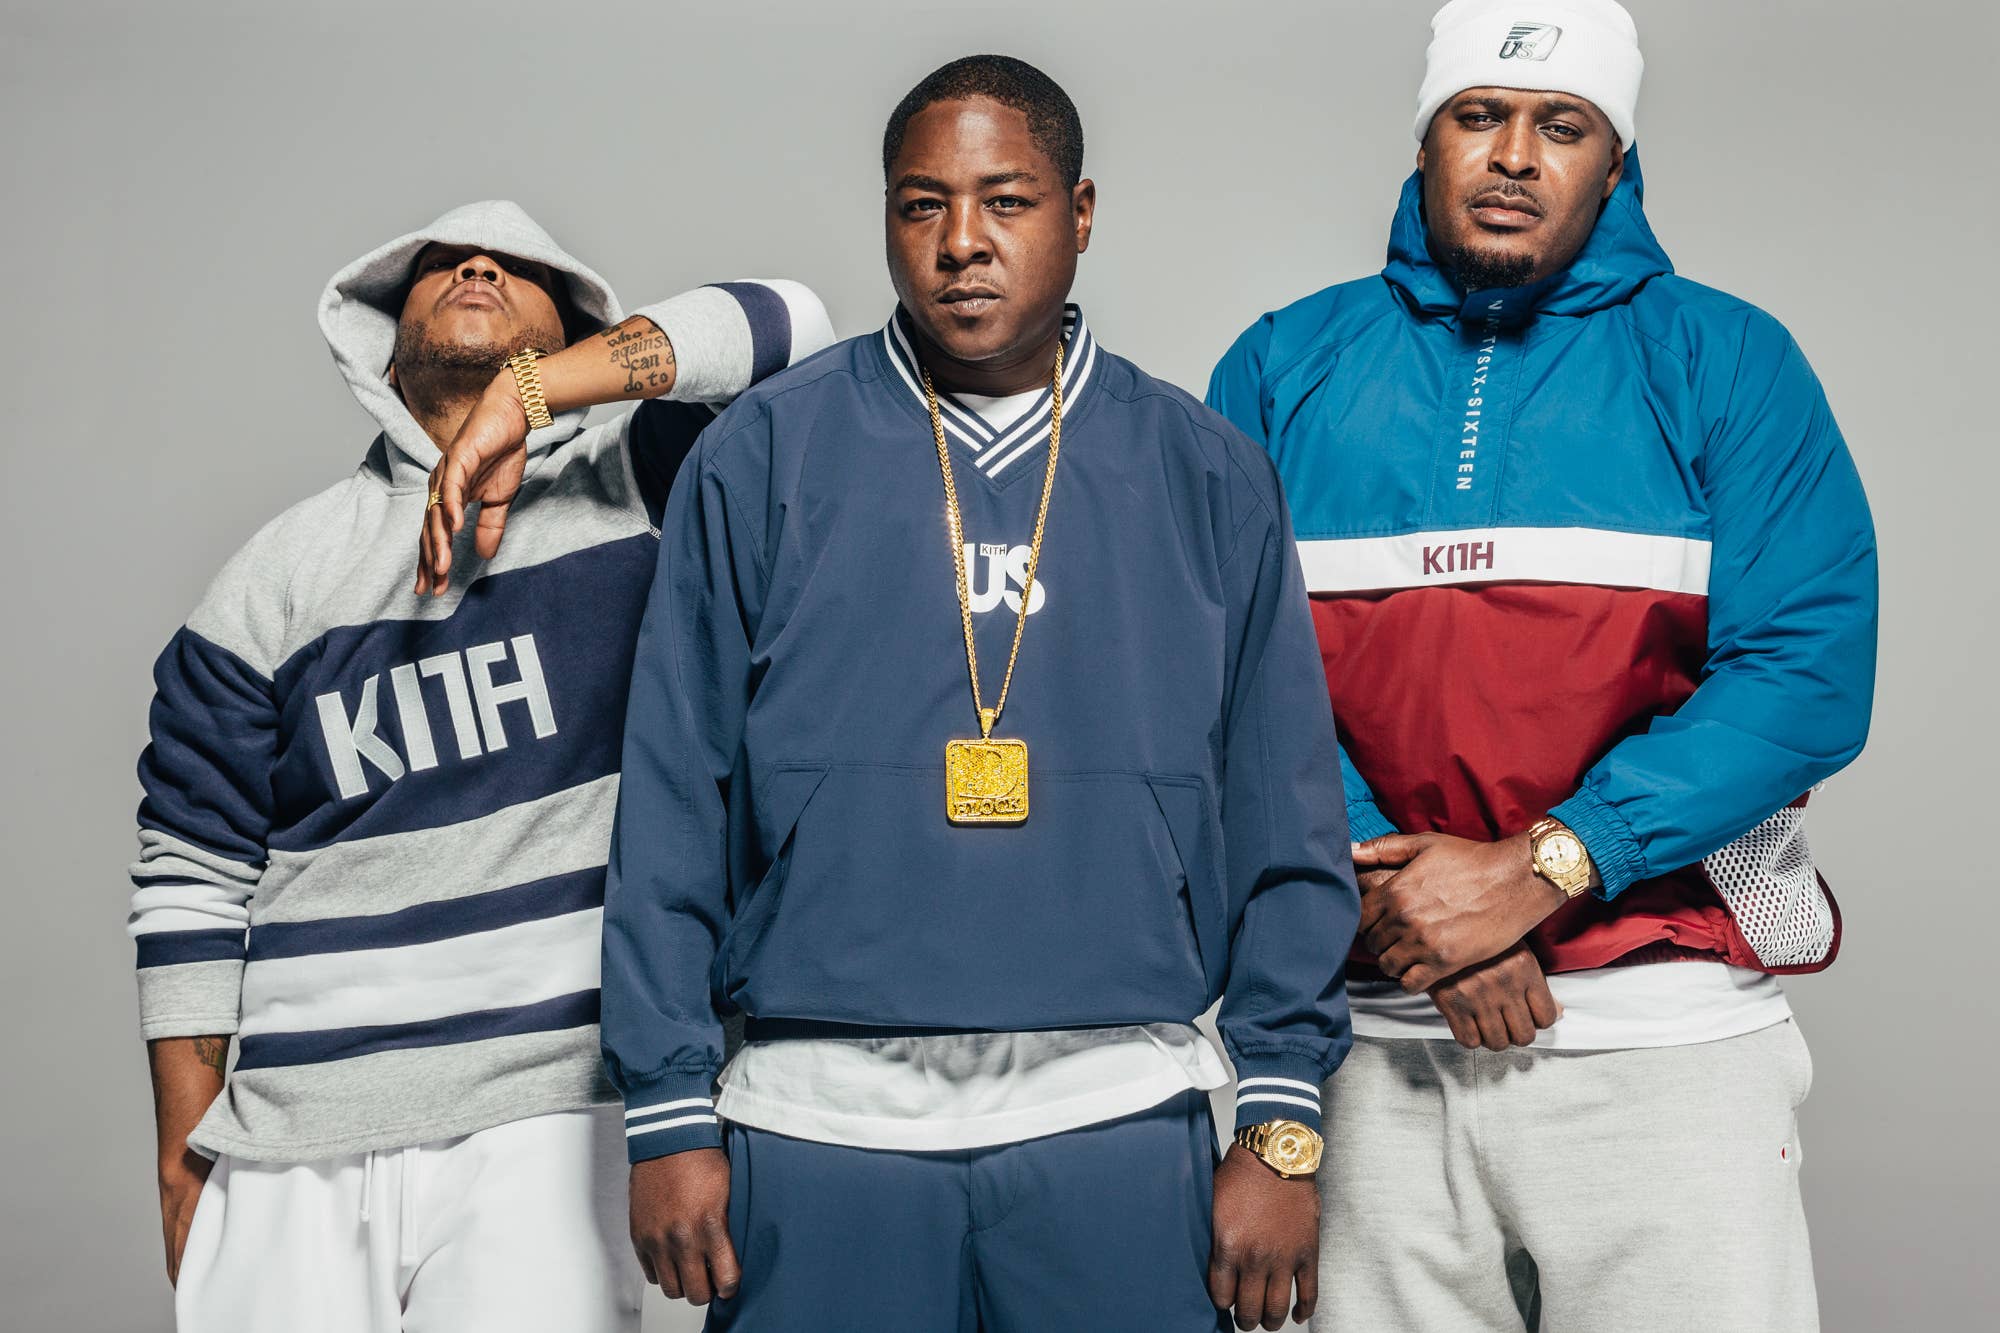 This is Kith's 96 Collection campaign featuring The Lox.